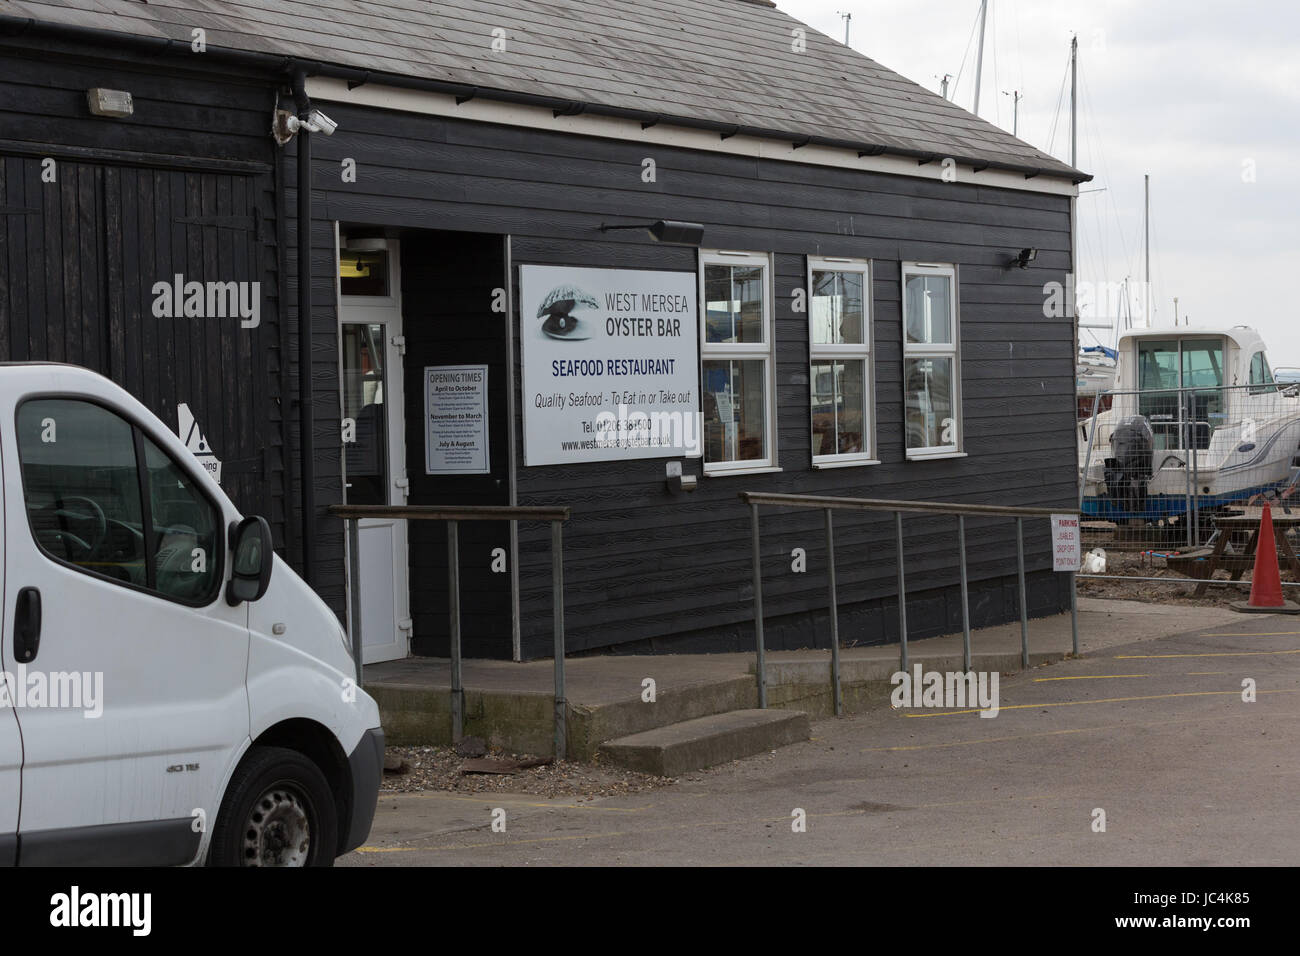 West Mersea Oyster Bar, Seafood restaurant Stock Photo